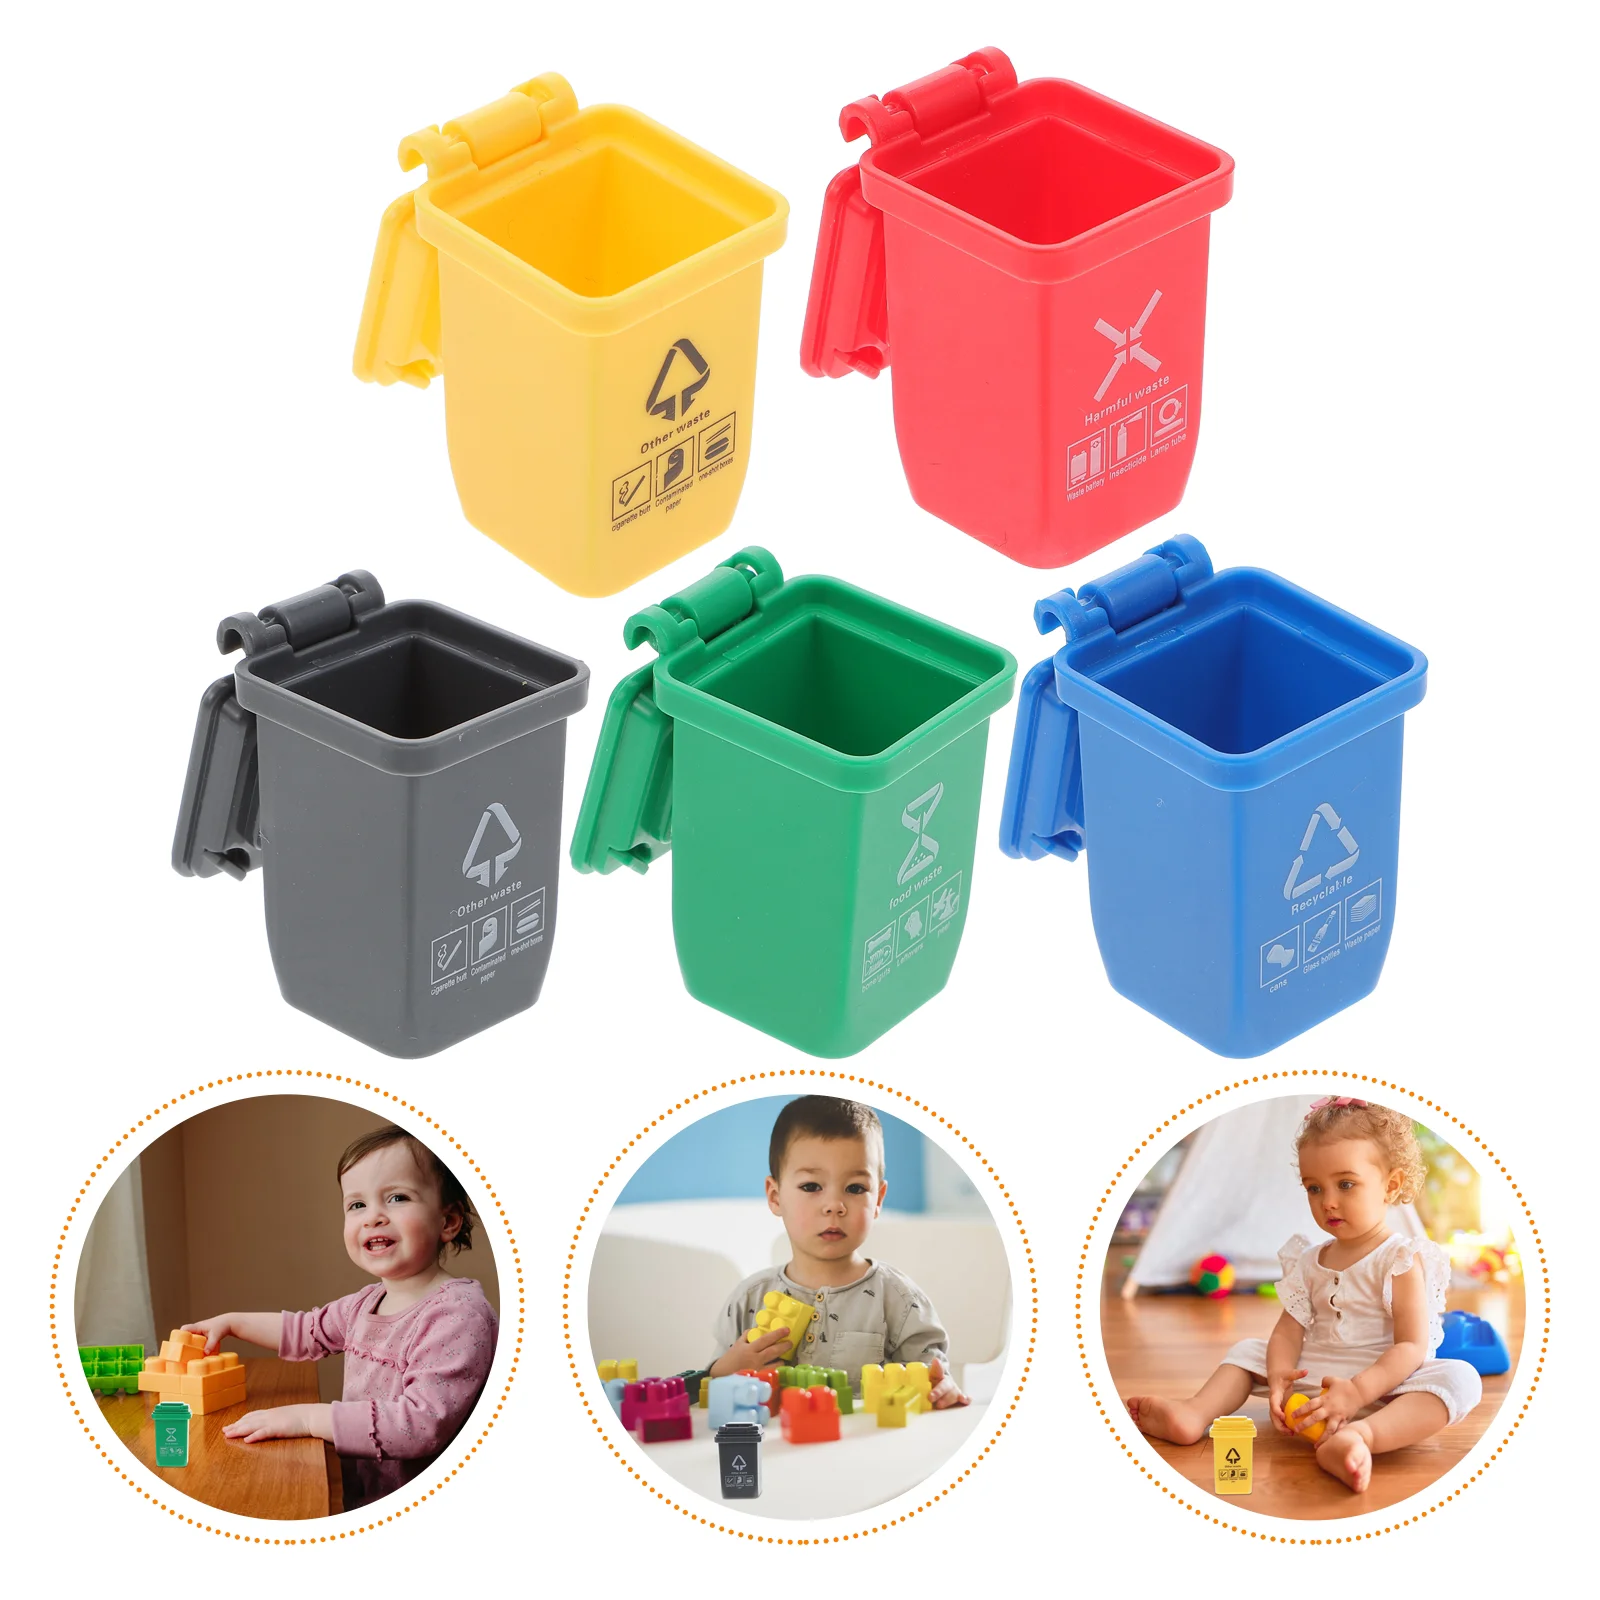 

Can Garbage Trash Mini Toy Miniature Model House Bin Truck Toys Cans Sorting Desk Kids Curbside Game Scene Recycle Tiny